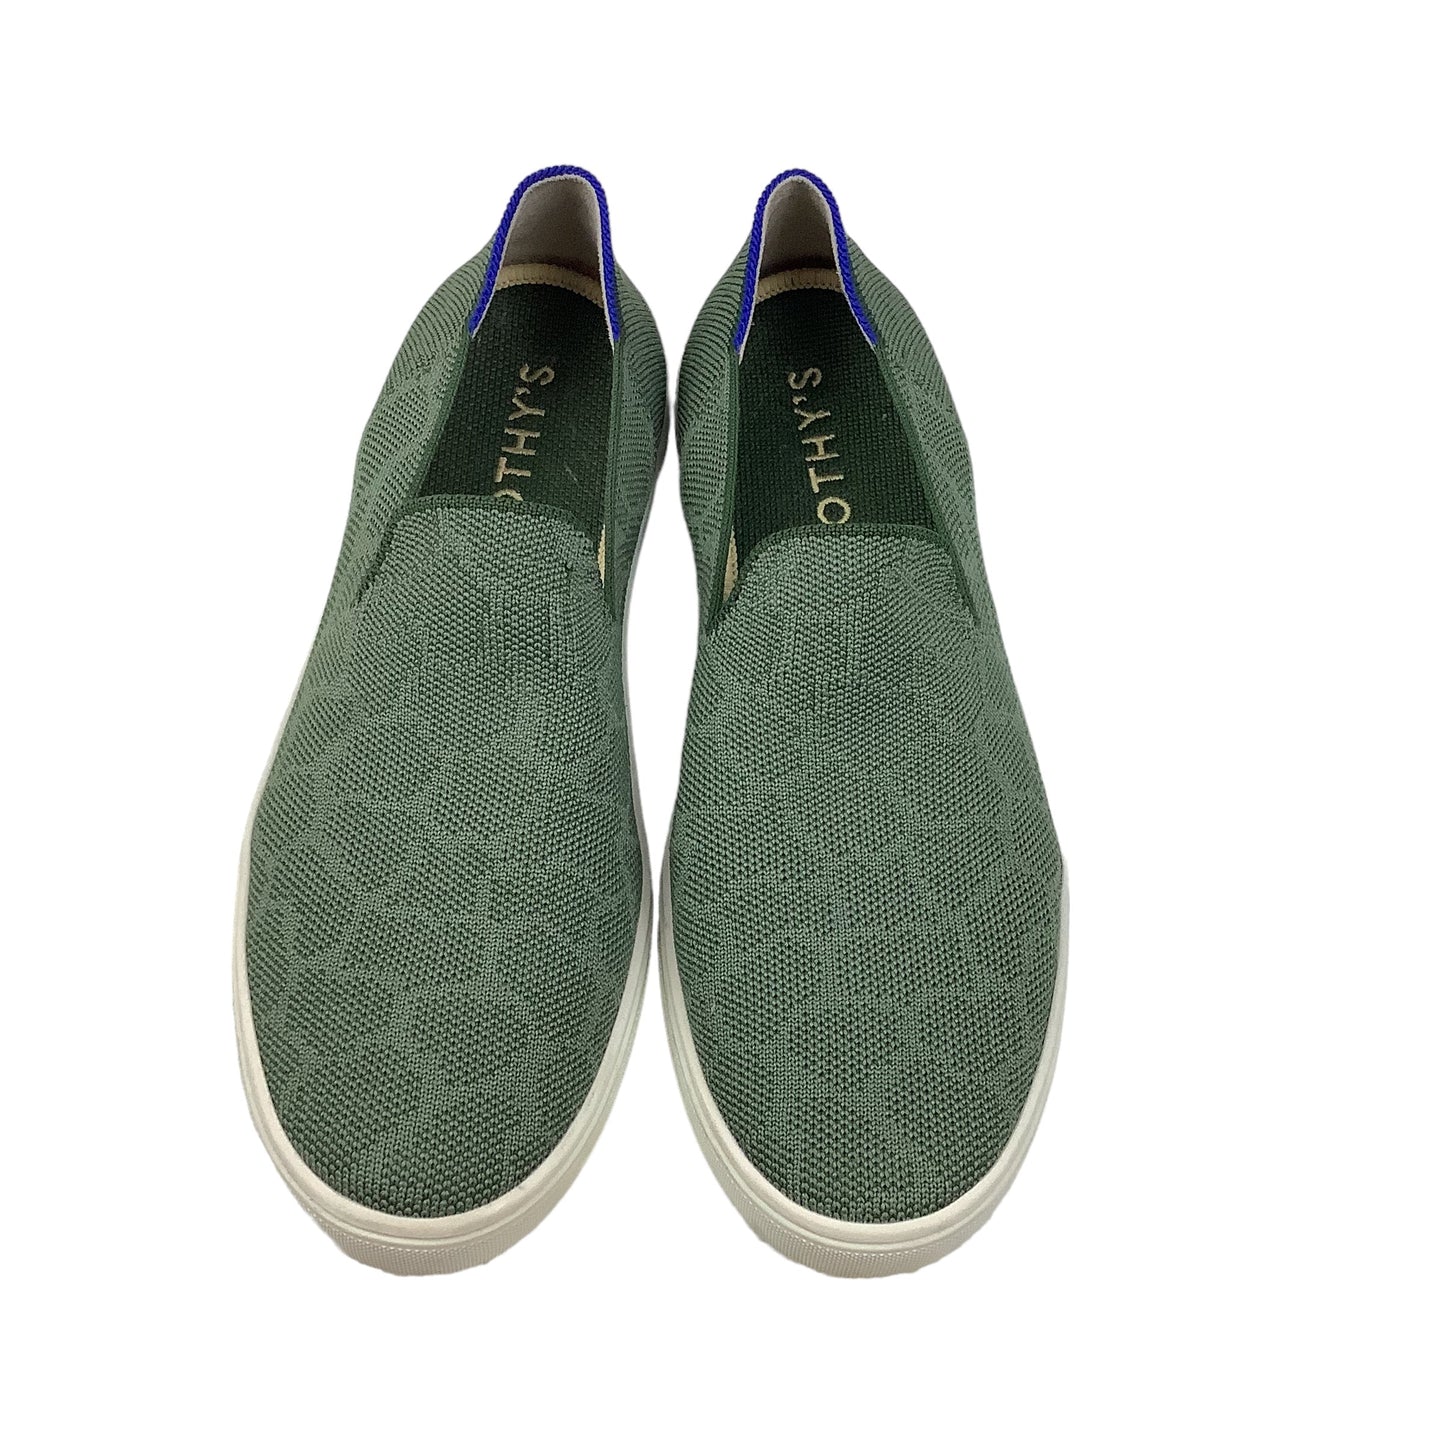 Green Shoes Designer Rothys, Size 9